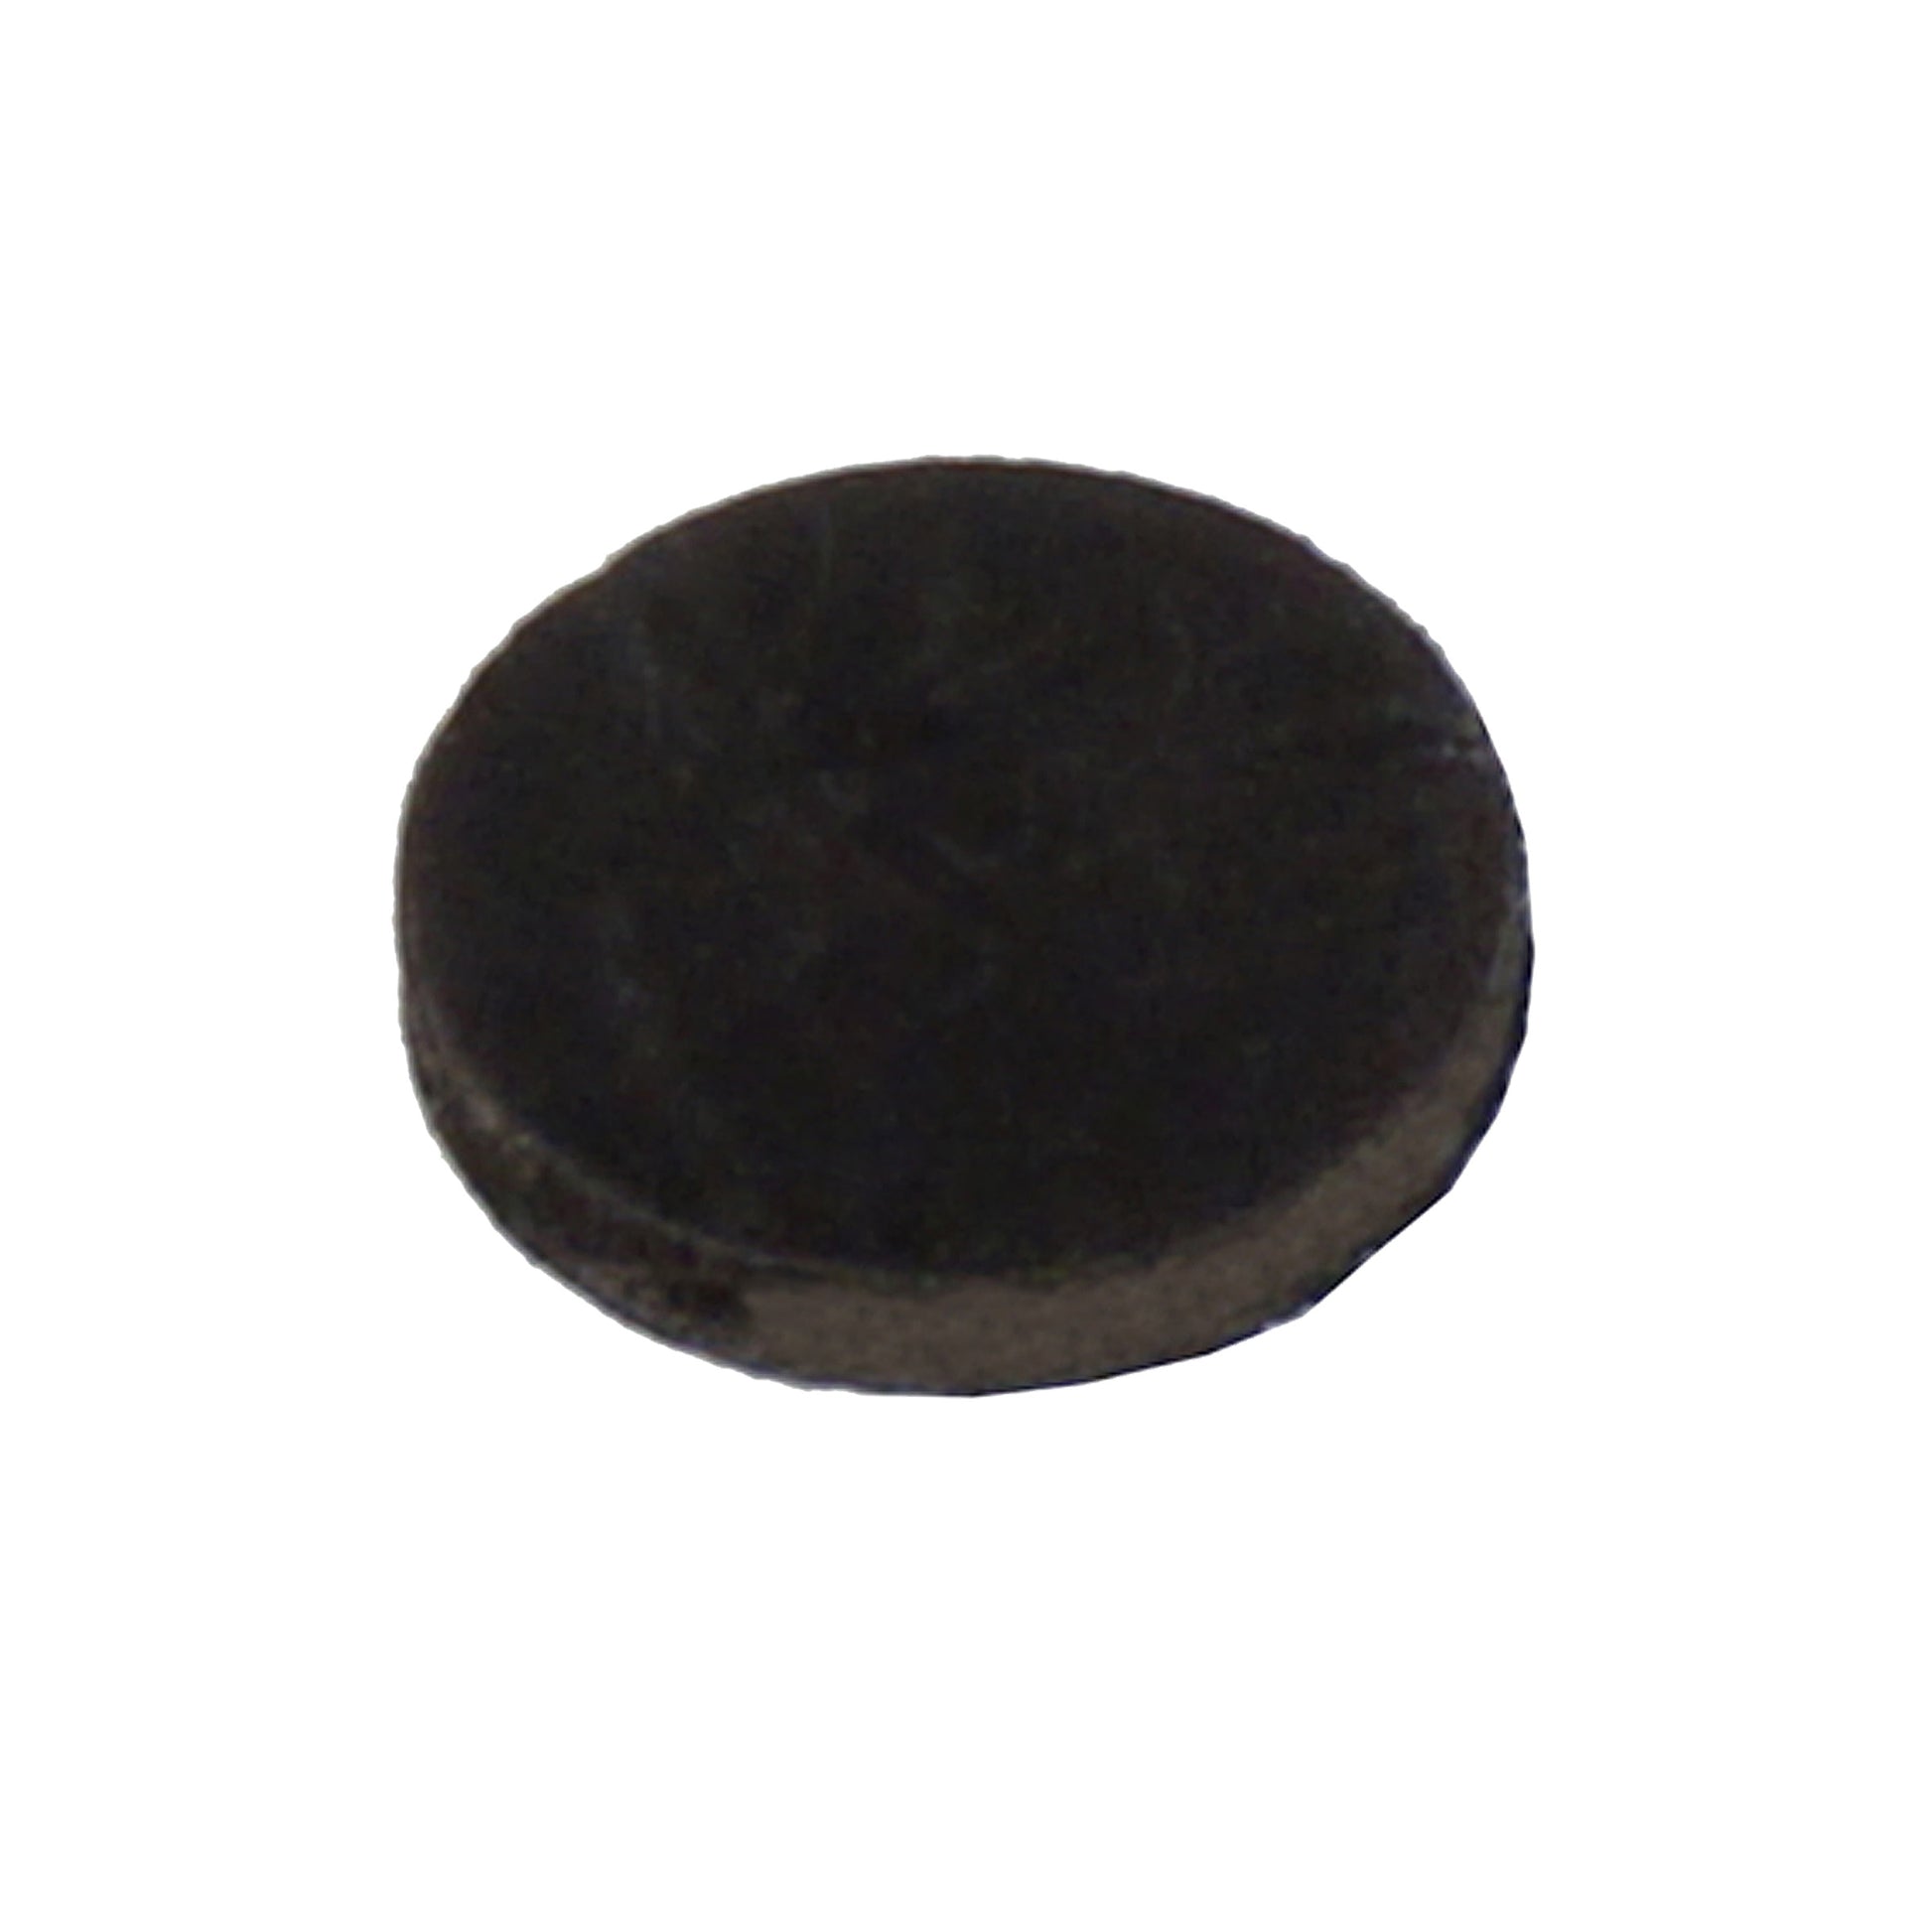 Load image into Gallery viewer, ND18703-35 Neodymium Disc Magnet - 45 Degree Angle View